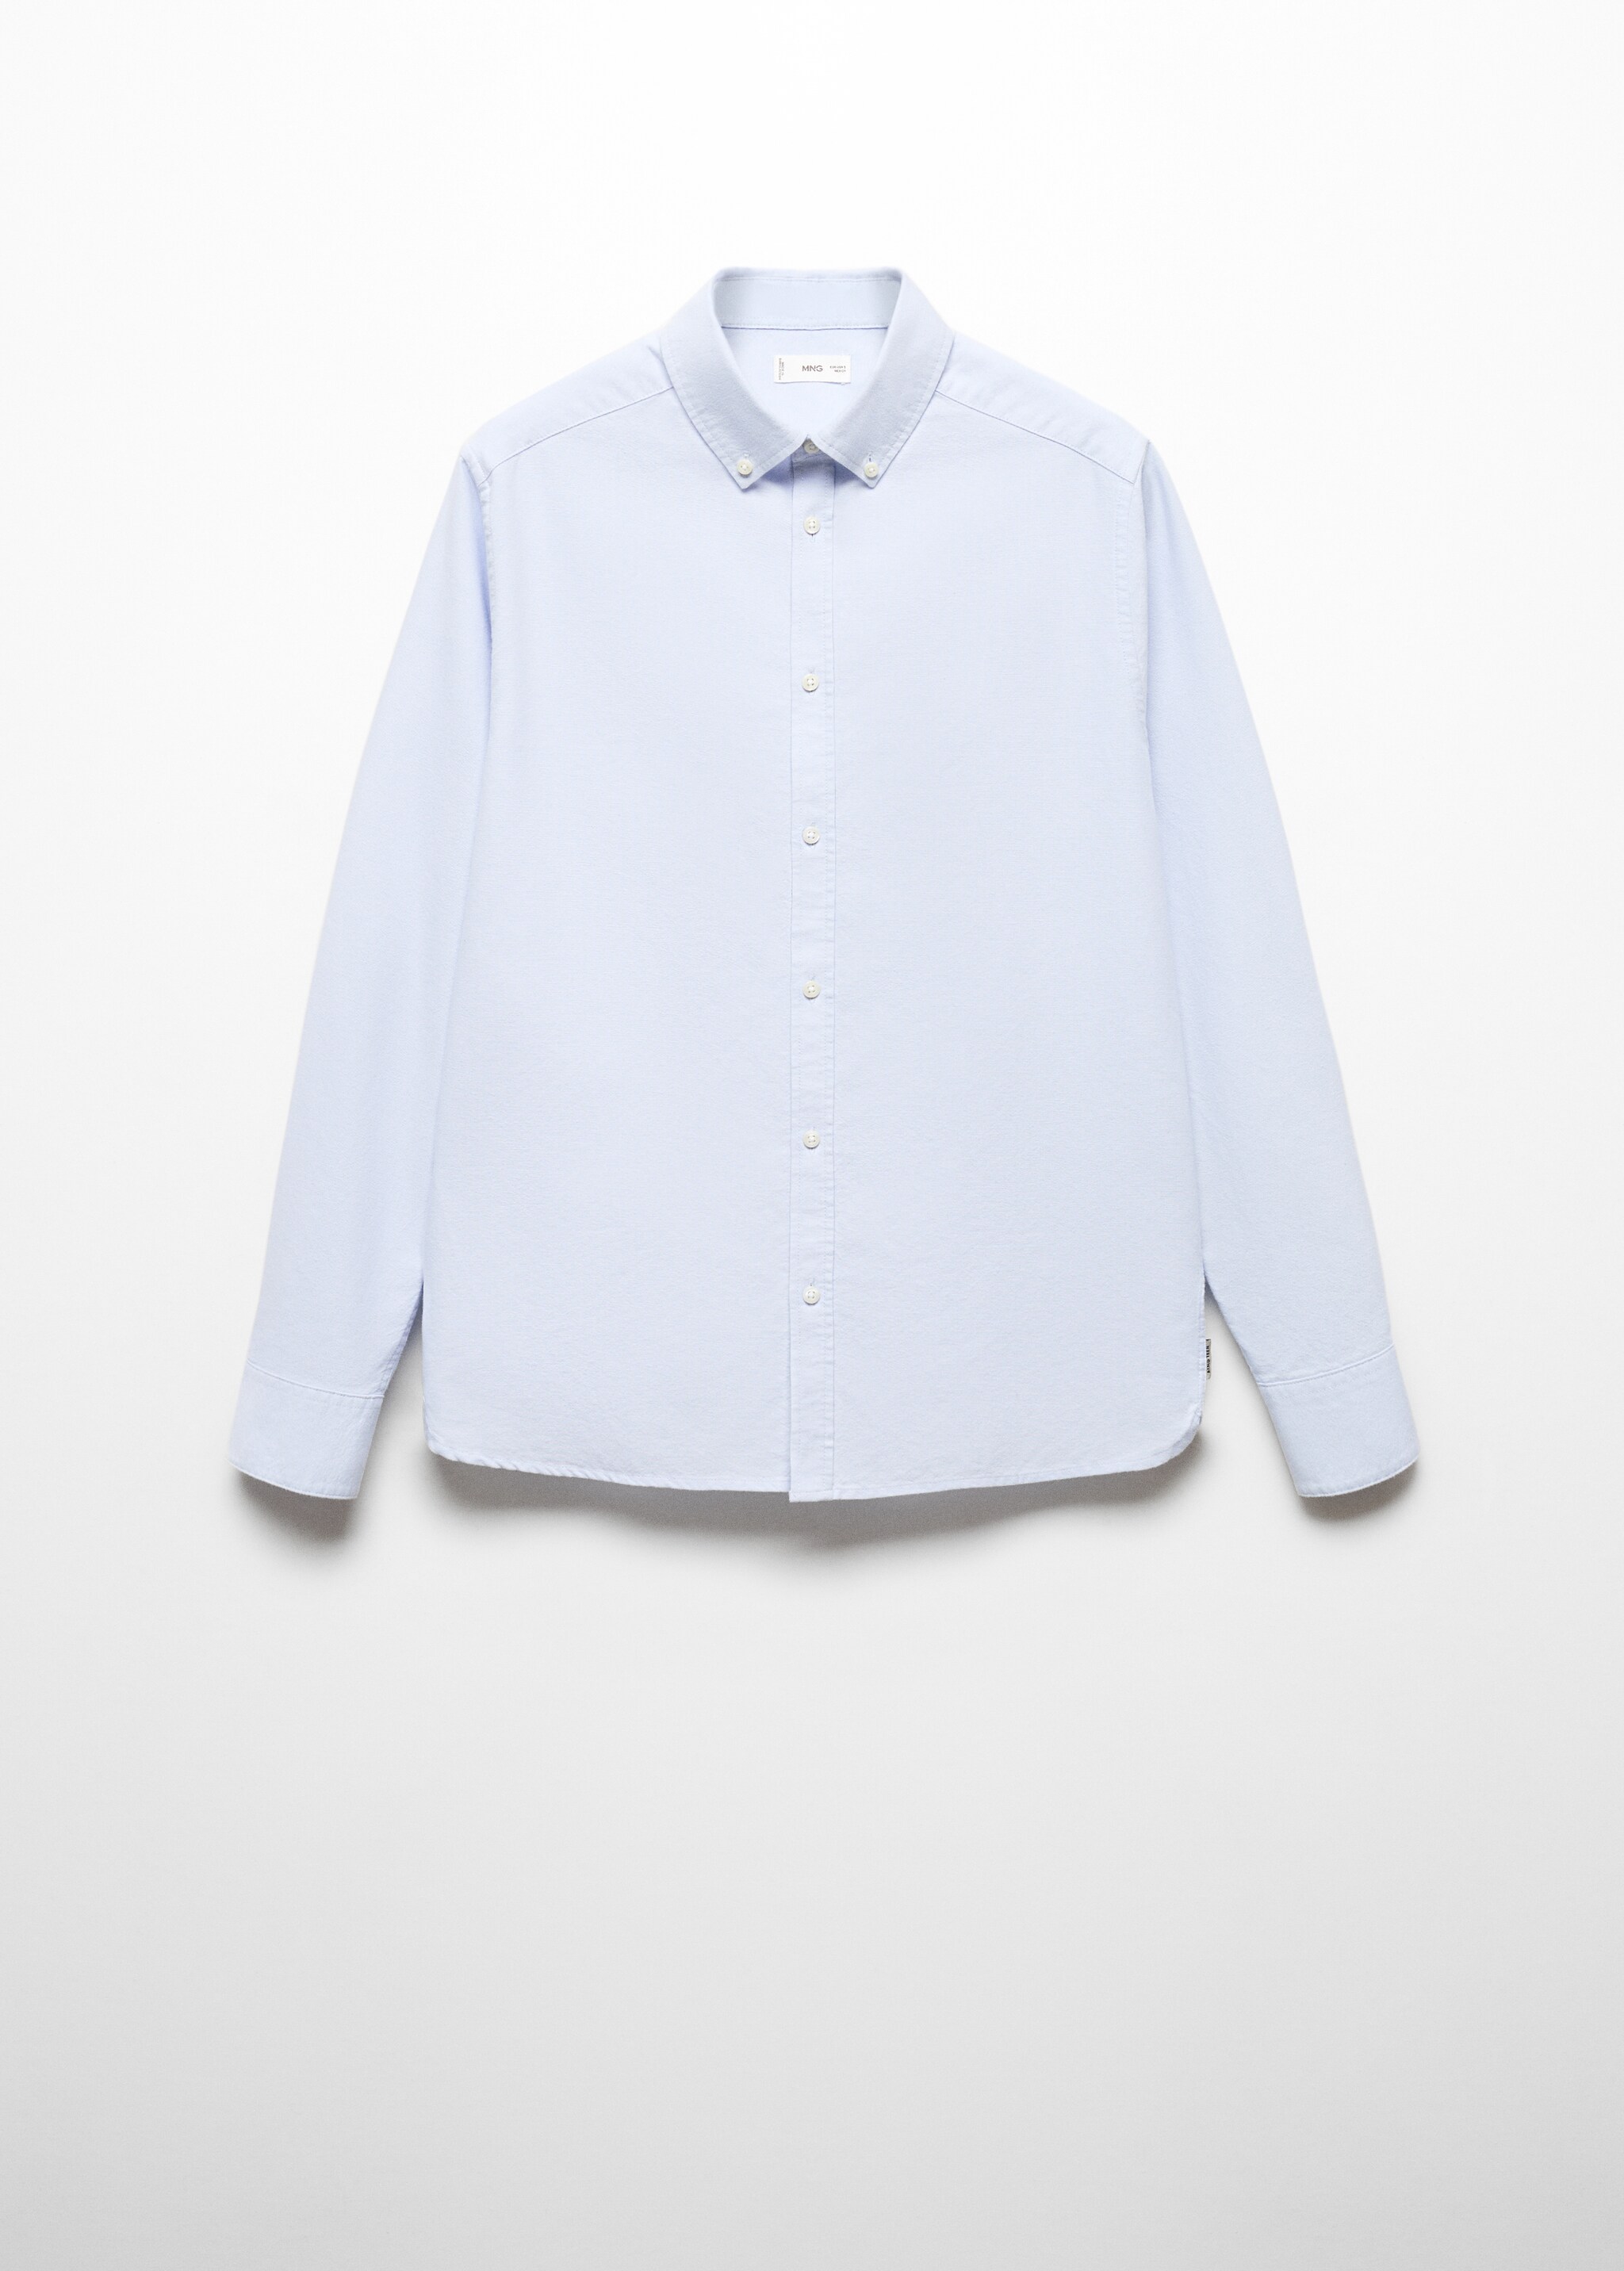 Unisex Oxford Shirt - Article without model